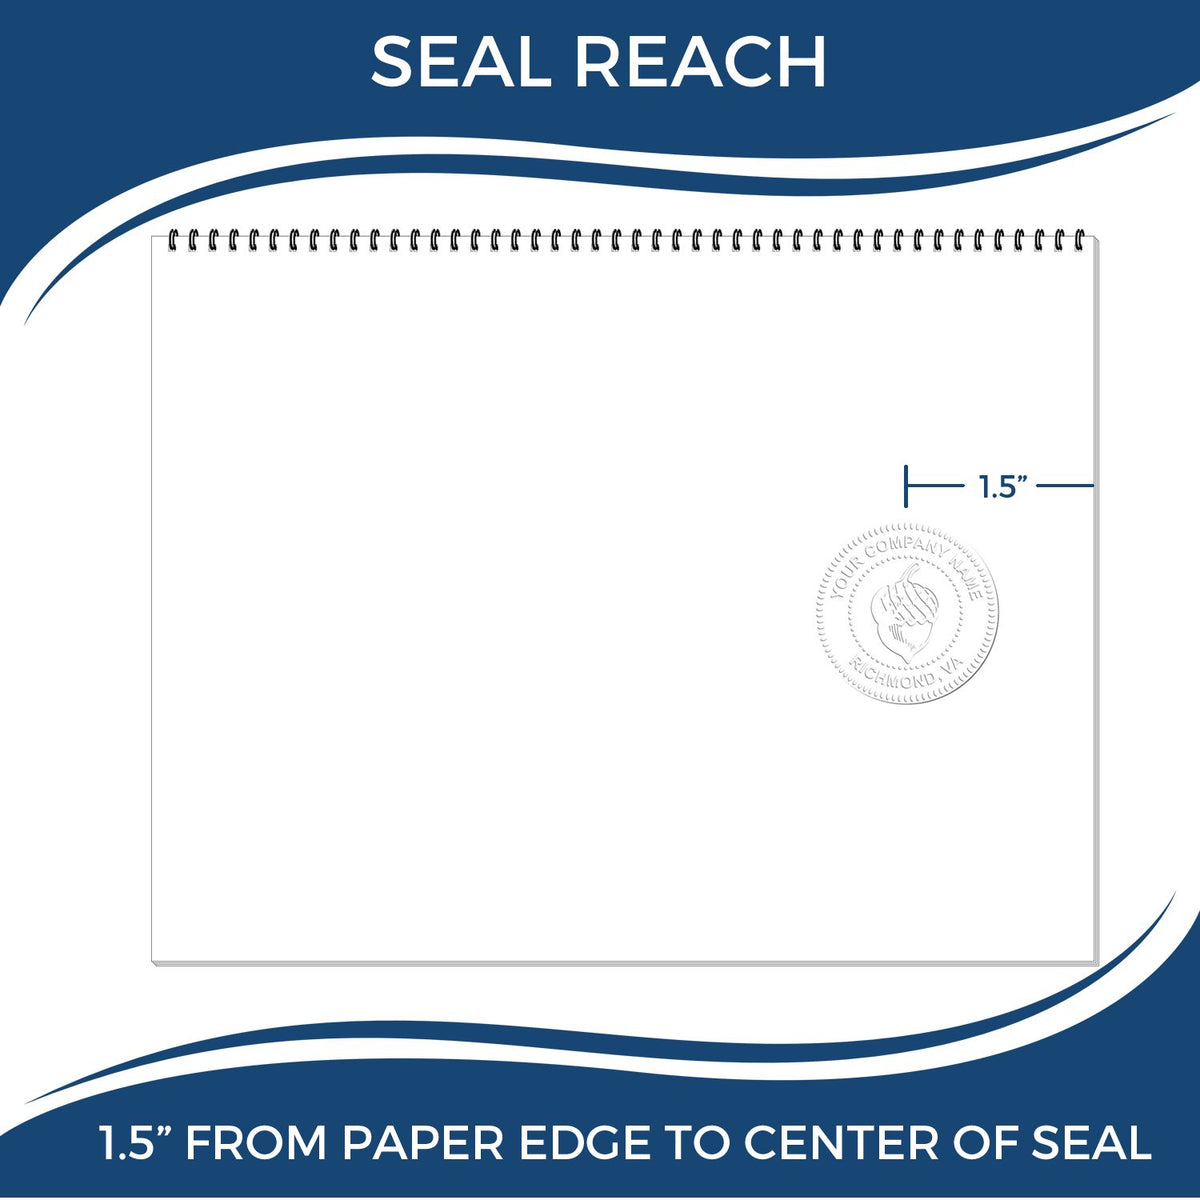 An infographic showing the seal reach which is represented by a ruler and a miniature seal image of the Gift Georgia Land Surveyor Seal